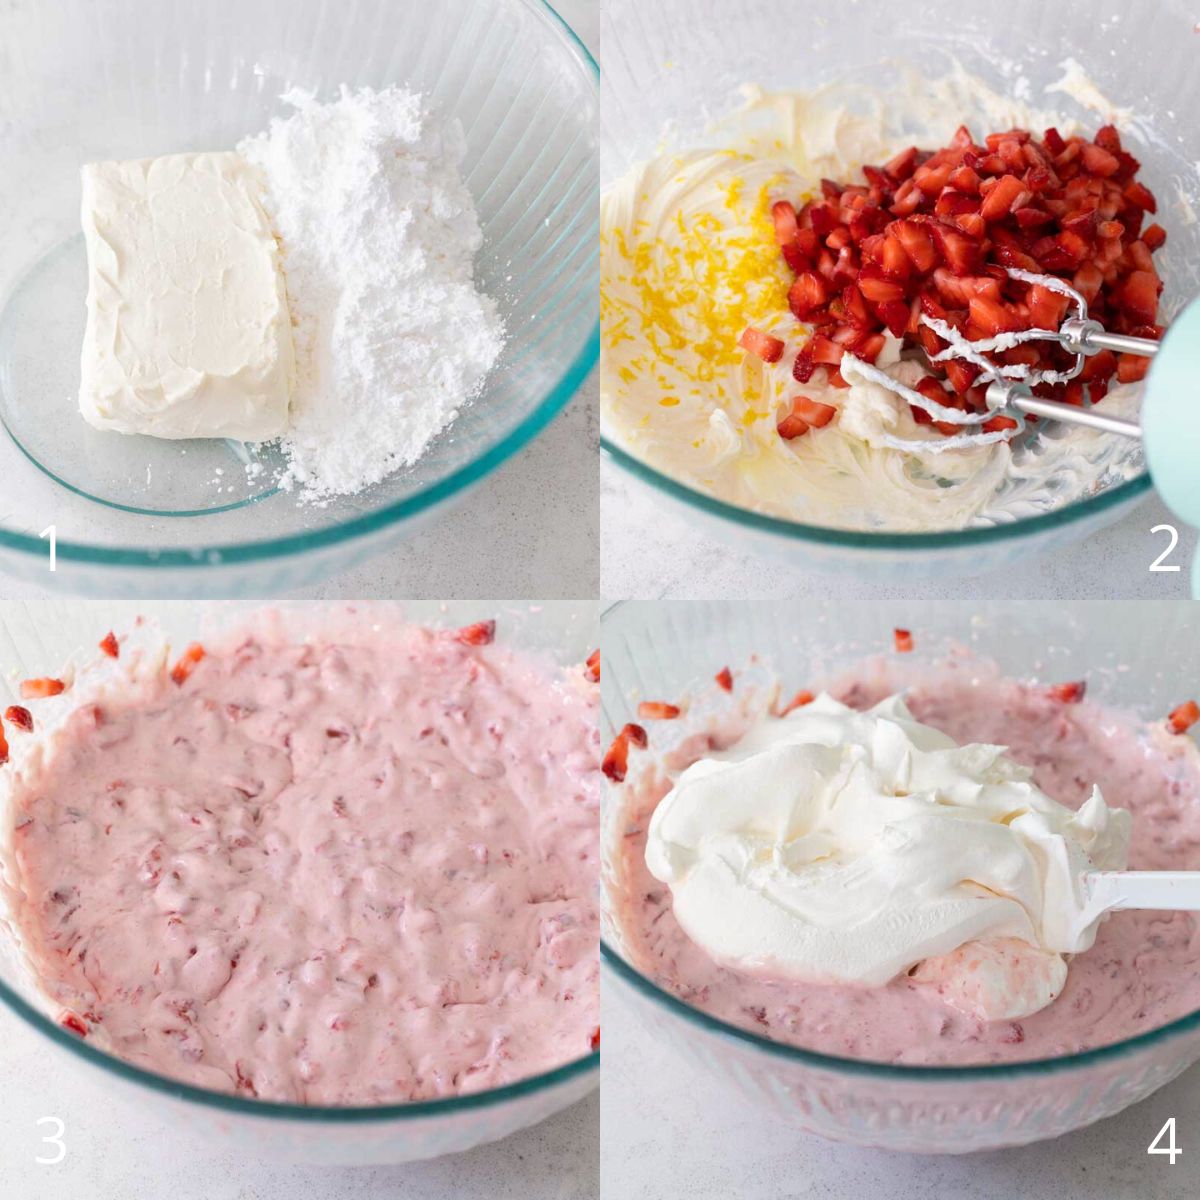 Step by step photos show how to make the strawberry cream filling.